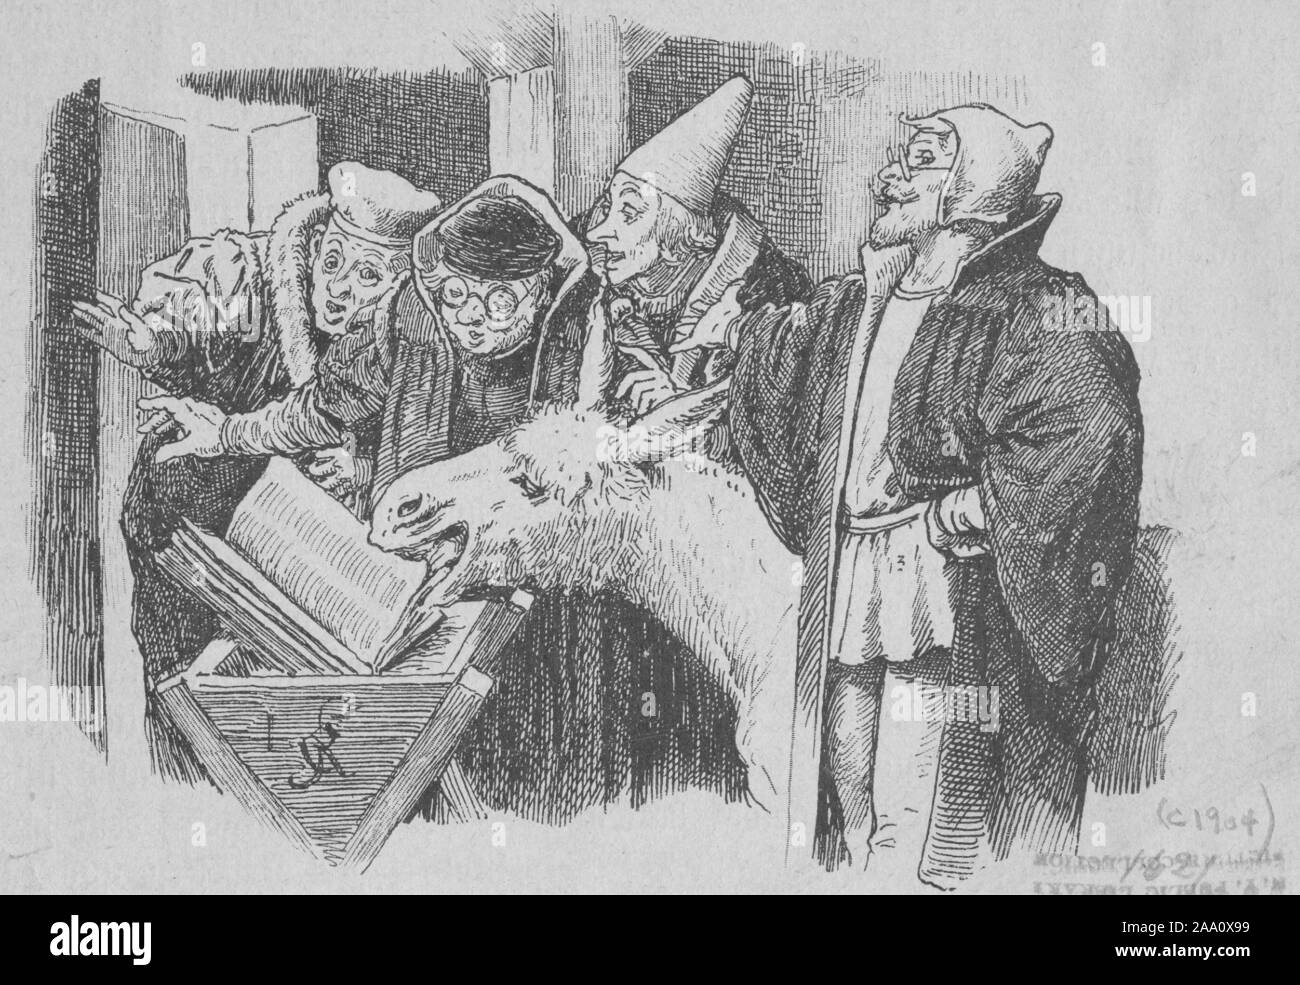 Monochrome illustration of a scene from the book 'Till Eulenspiegels lustige Streiche' by author Georg Paysen Petersen, featuring a donkey turning the pages of a book, with university professors looking on in amazement, illustrated by Eugen Klimsch, published by Loewe Publishing, 1904. From the New York Public Library. () Stock Photo